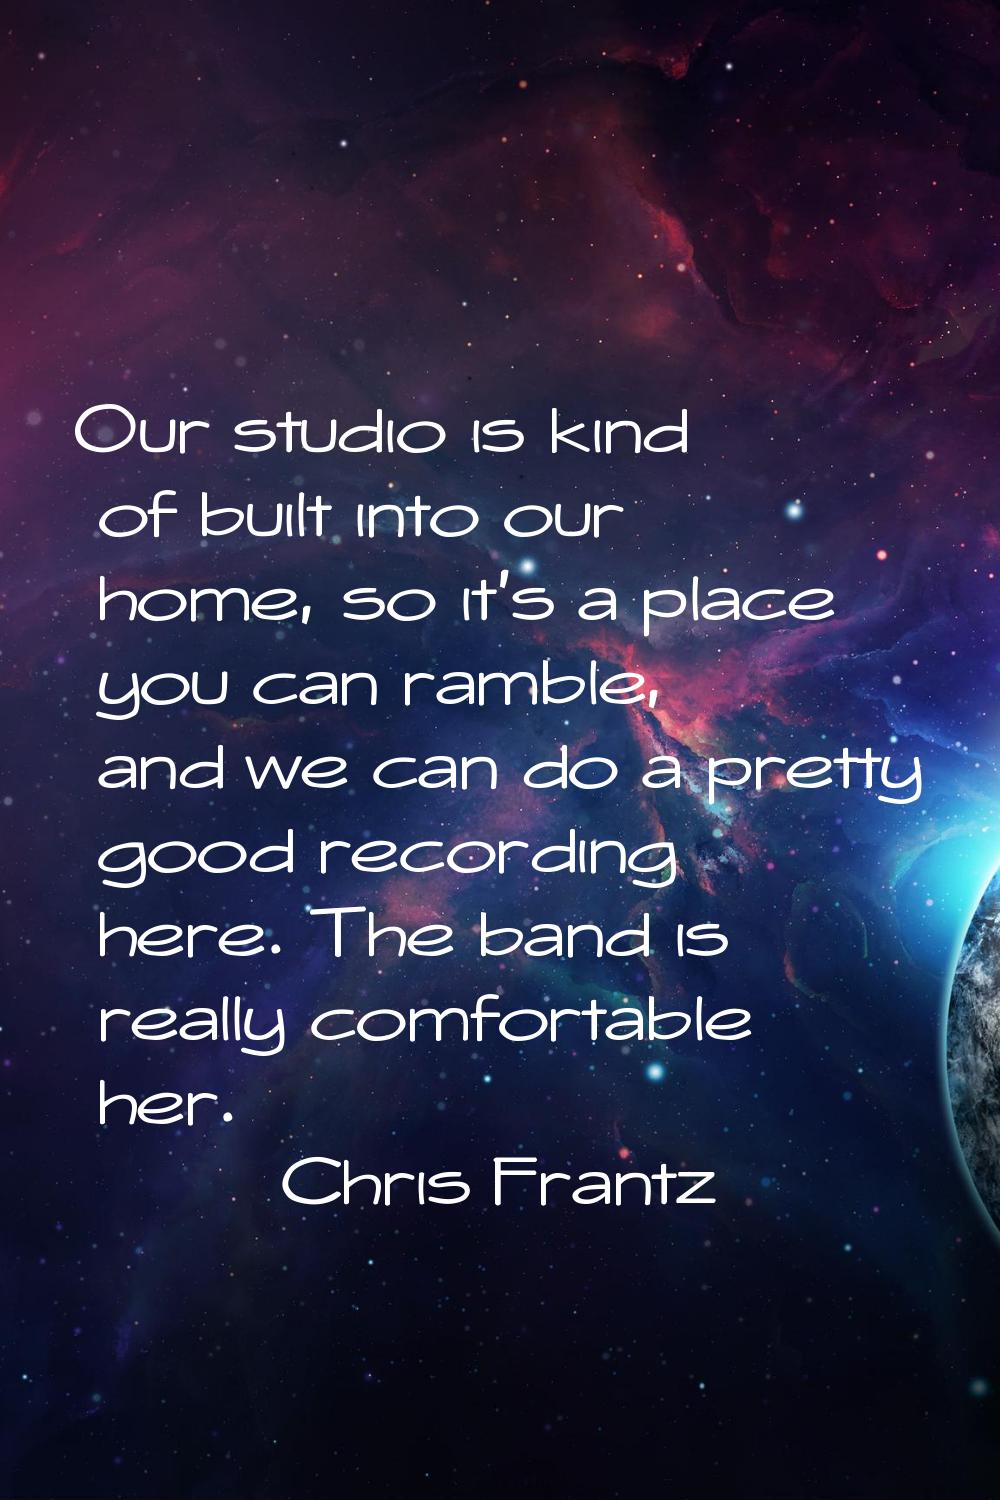 Our studio is kind of built into our home, so it's a place you can ramble, and we can do a pretty g